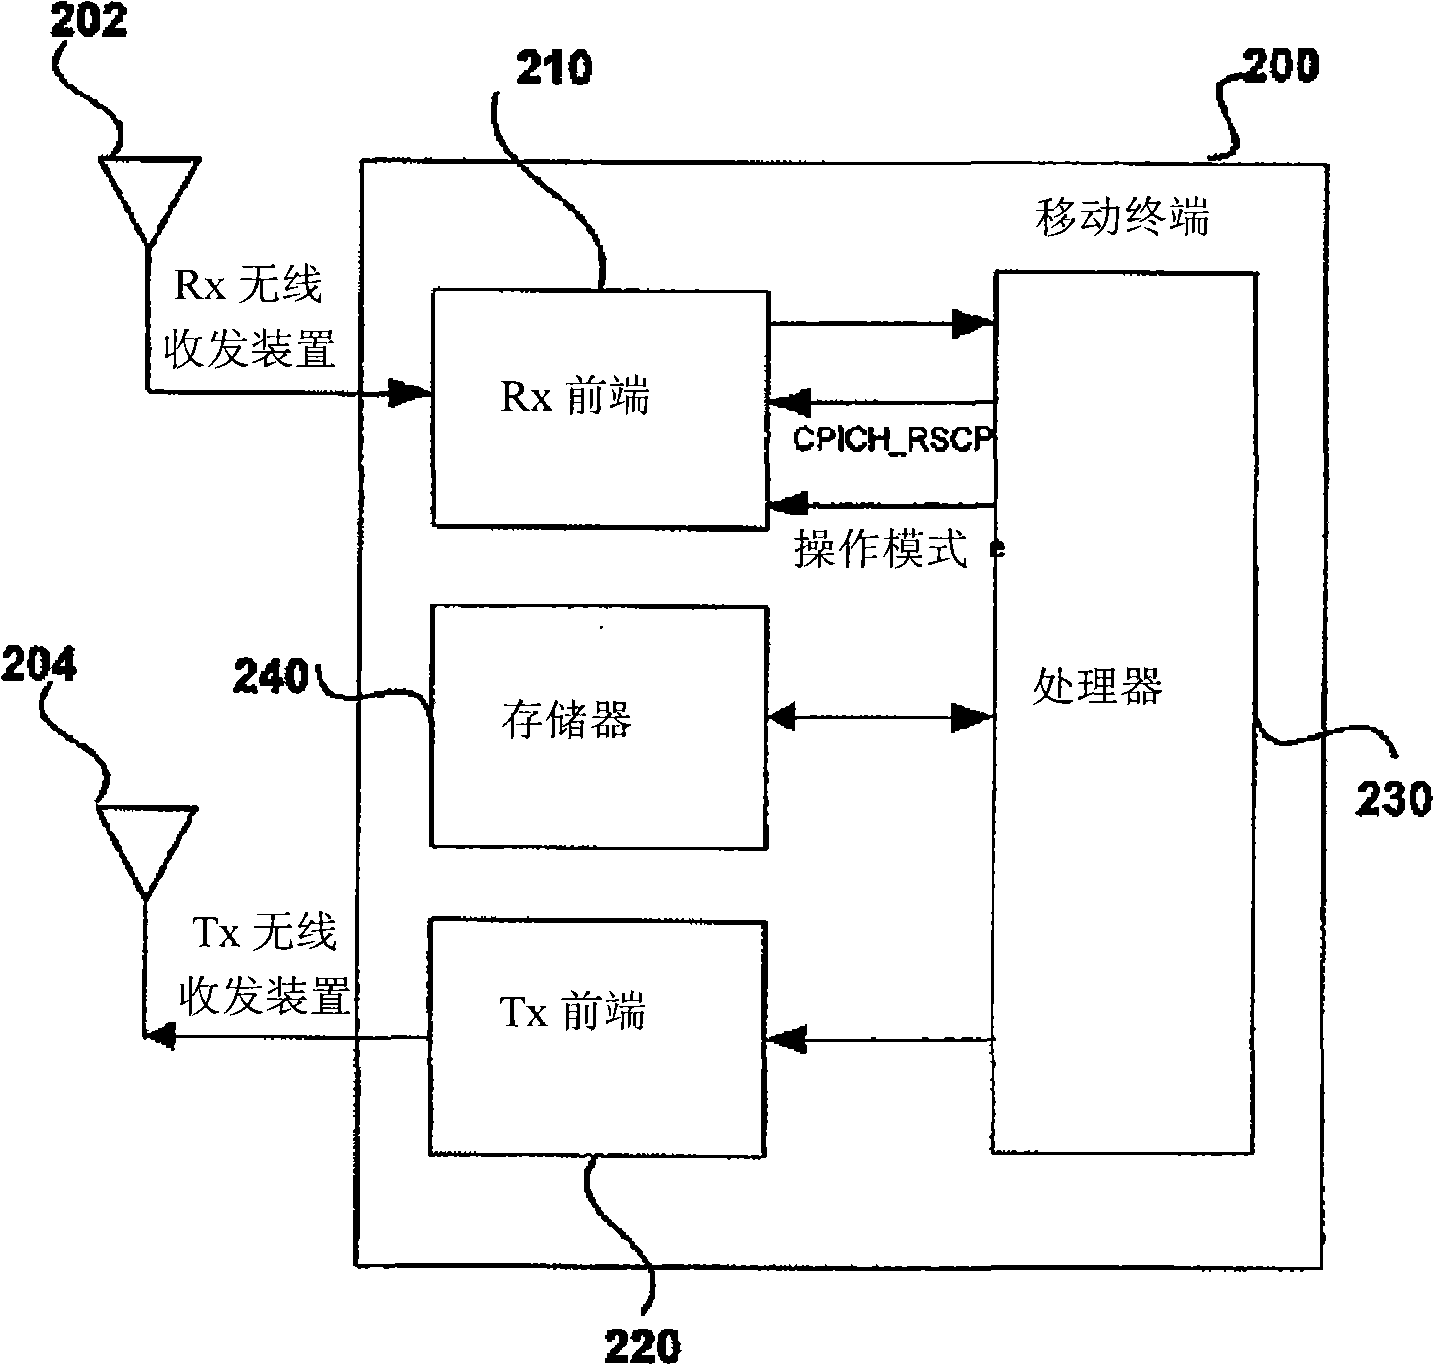 Method and system for processing signals